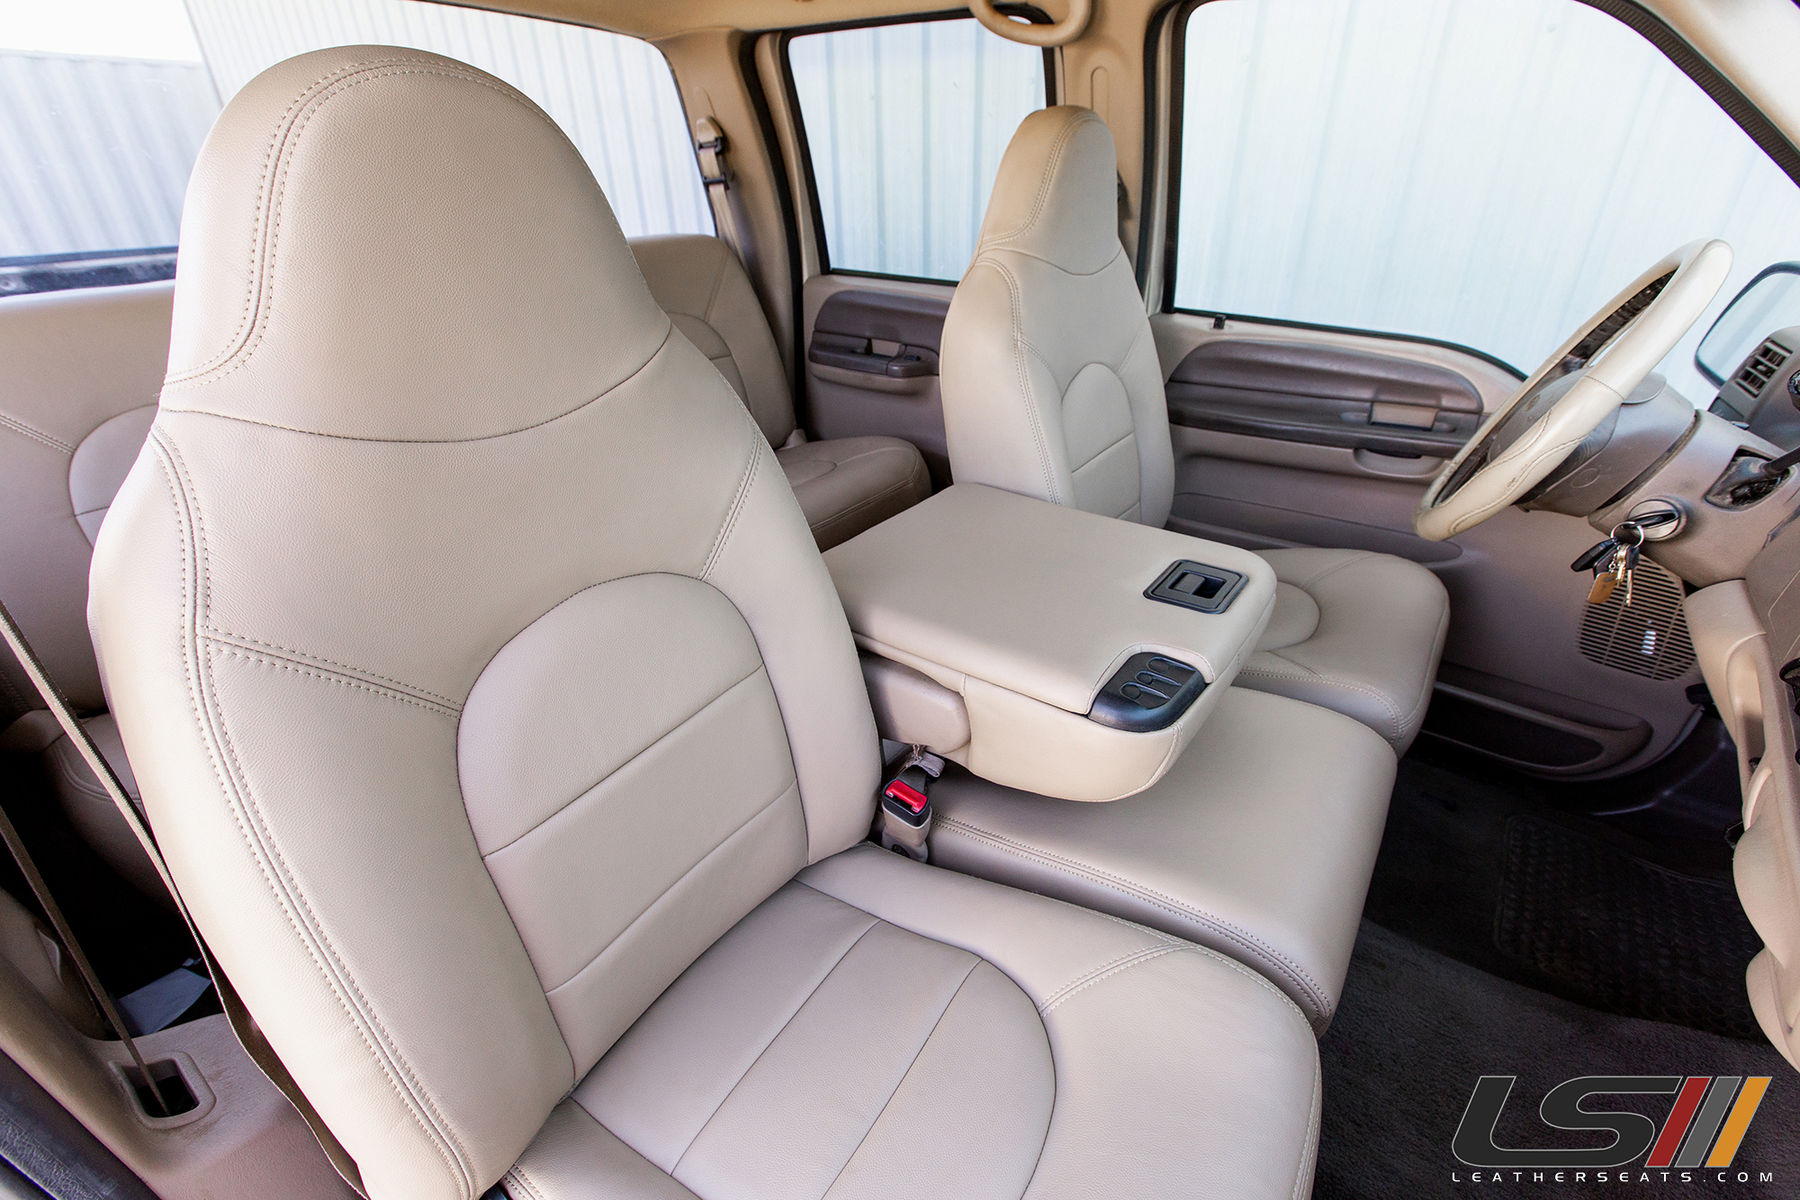 1999 Ford F250 Interior By Leatherseats Com